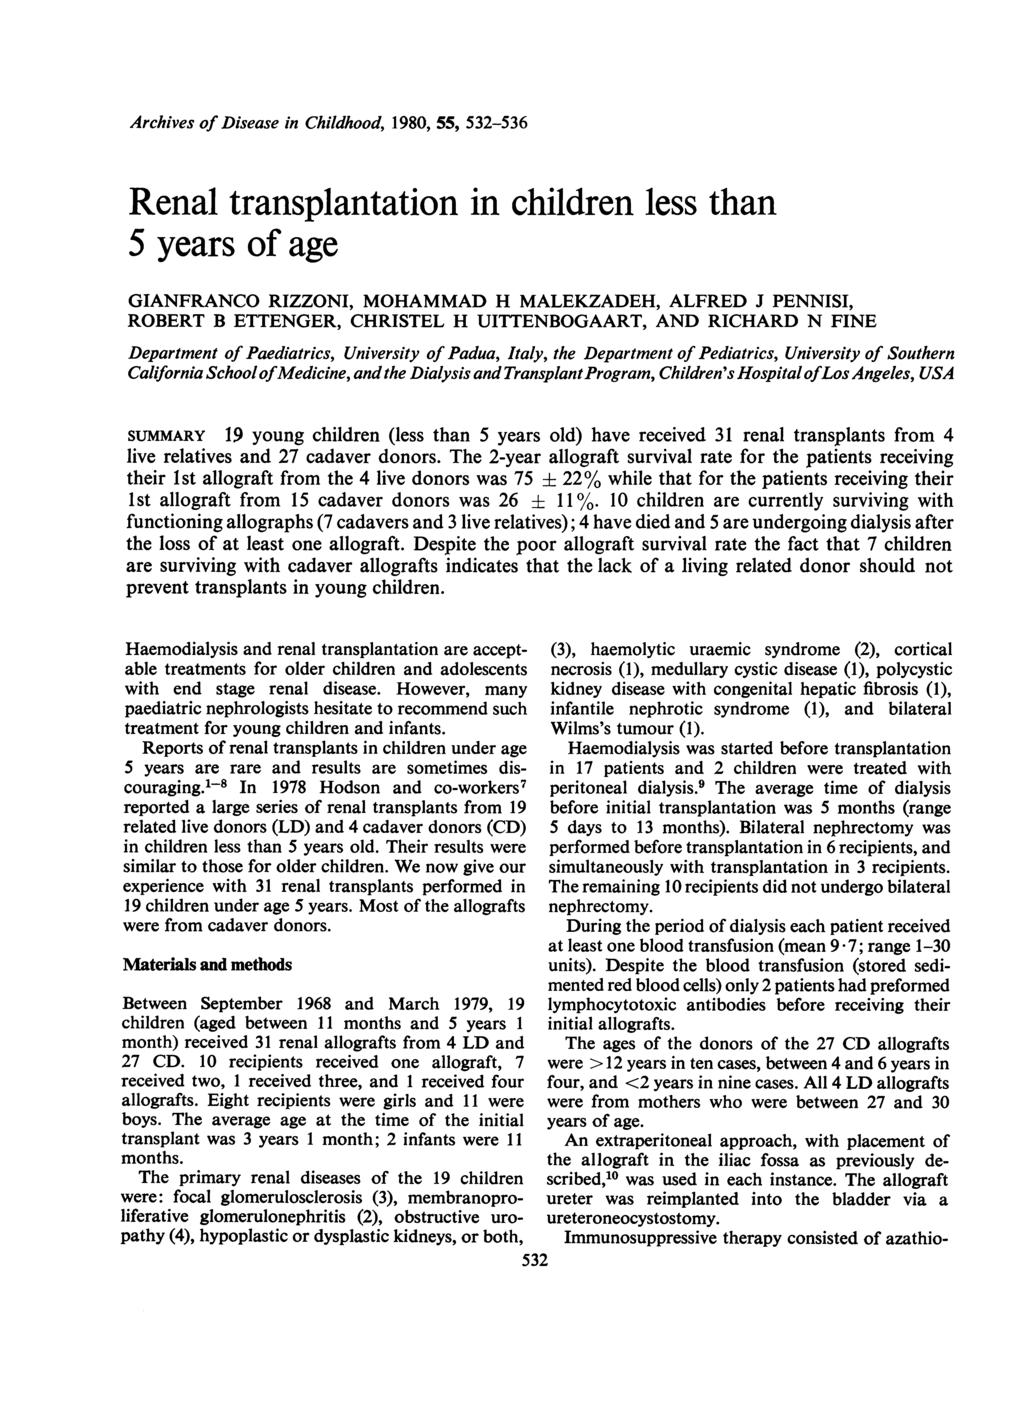 Archives of Disease in Childhood, 980, 55, 532-536 Renal transplantation in children less than 5 years of age GIANFRANCO RIZZONI, MOHAMMAD H MALEKZADEH, ALFRED J PENNISI, ROBERT B ETTENGER, CHRISTEL